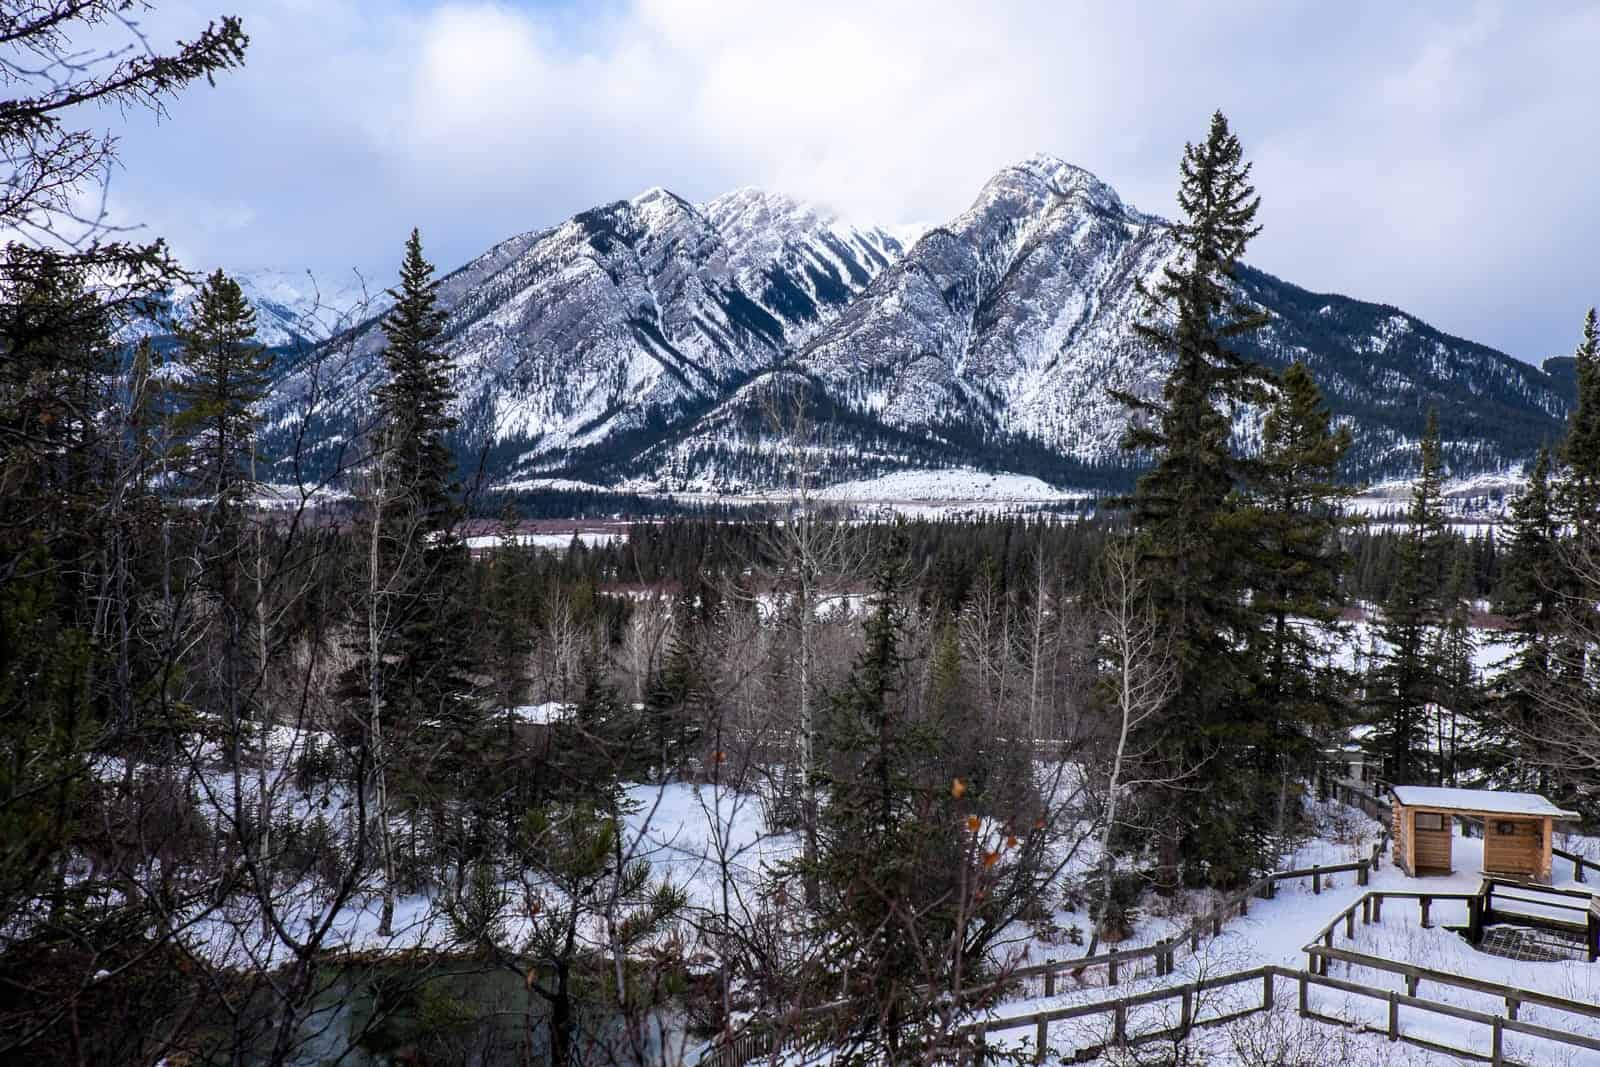 Mountains covered in snow in Banff National Park